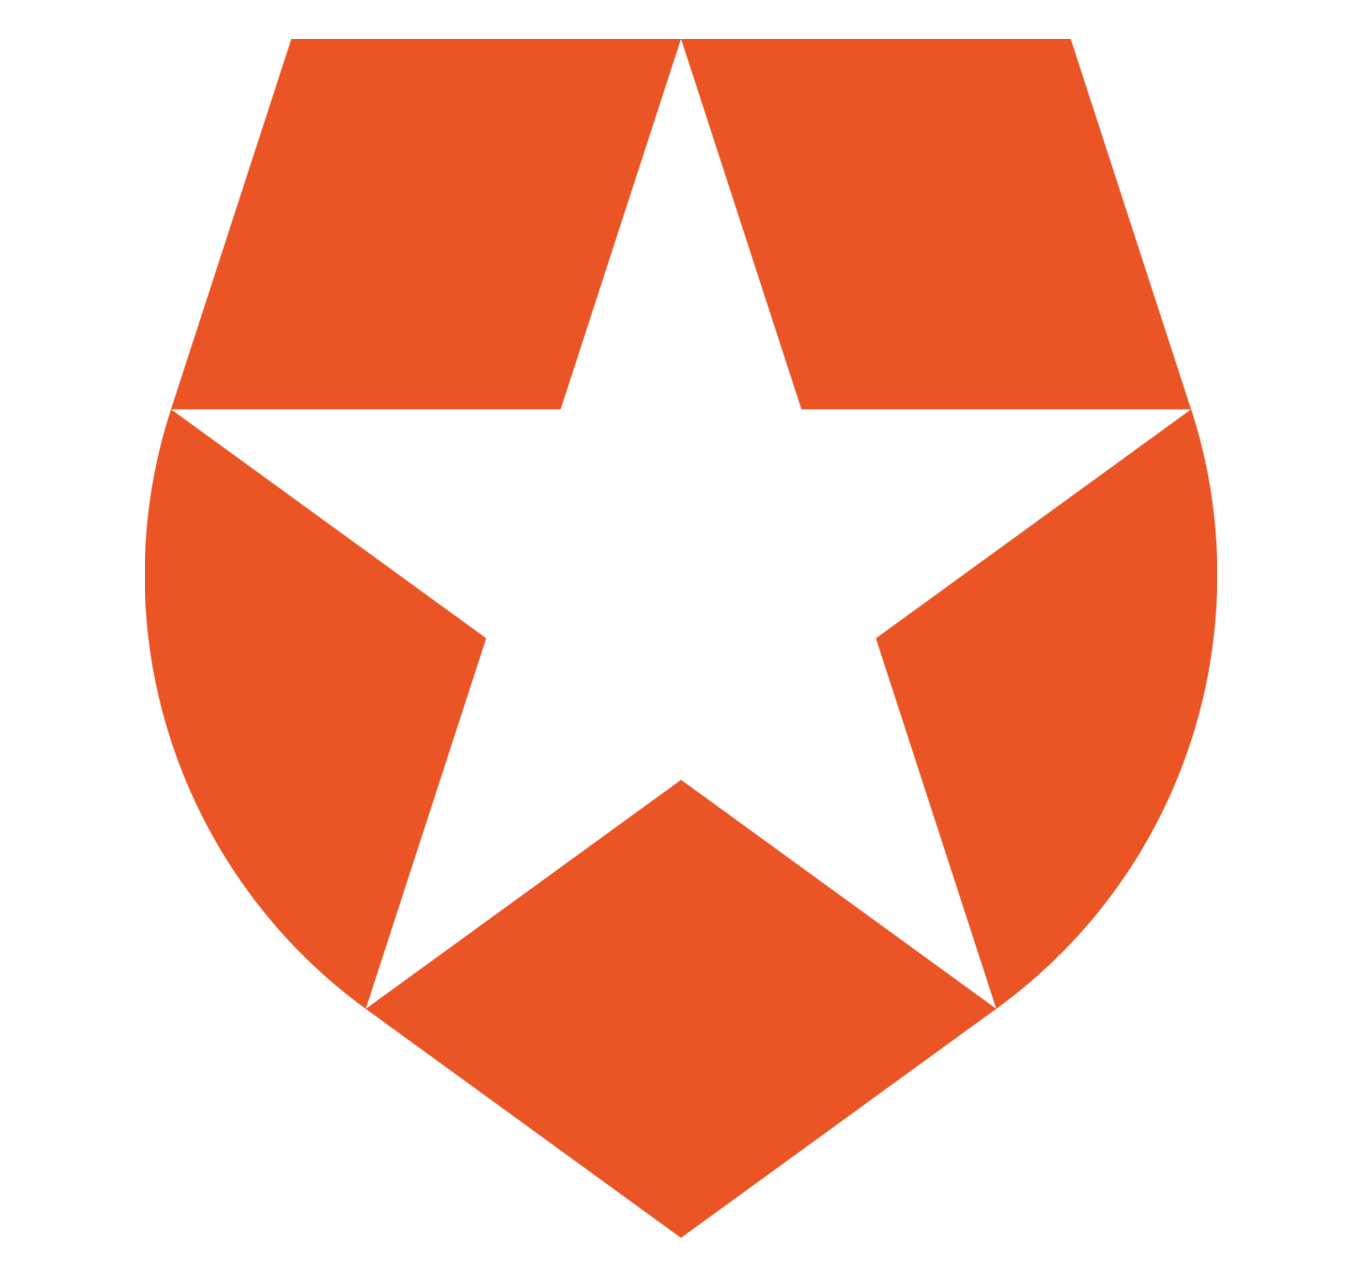 Auth0 logo icon - an orange shield with a white star graphic in the center.